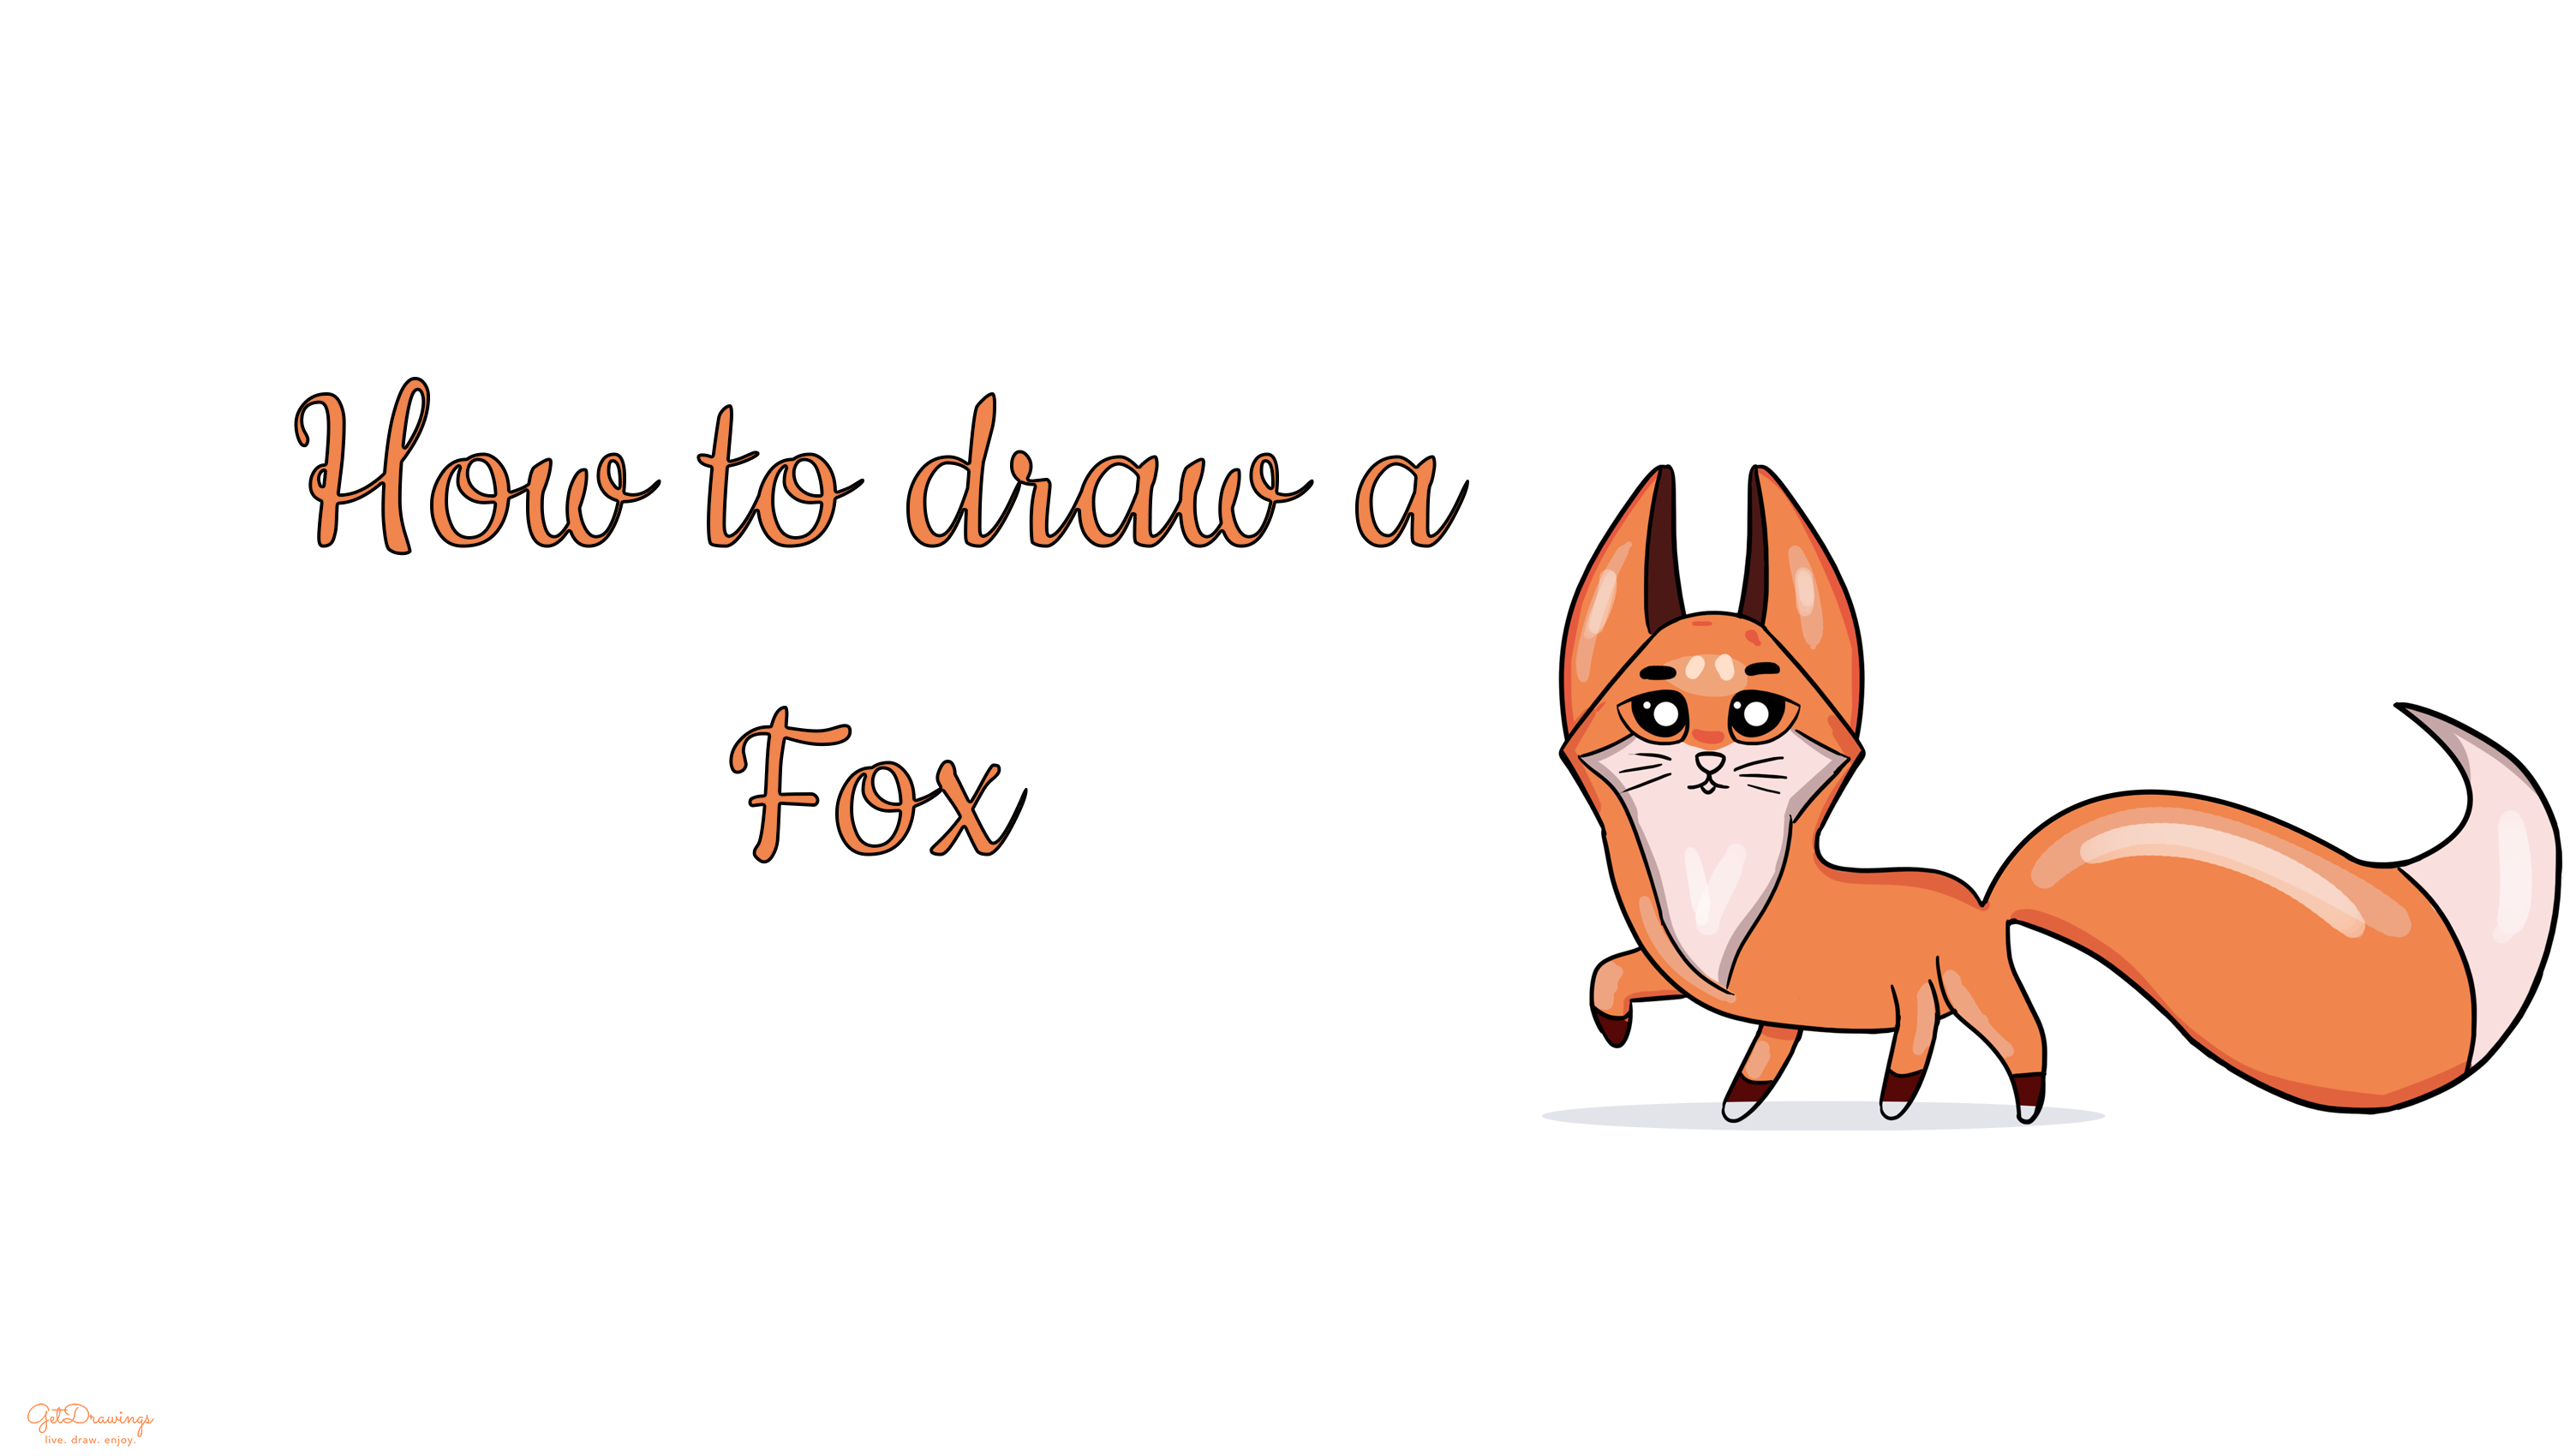 How to draw a Fox?